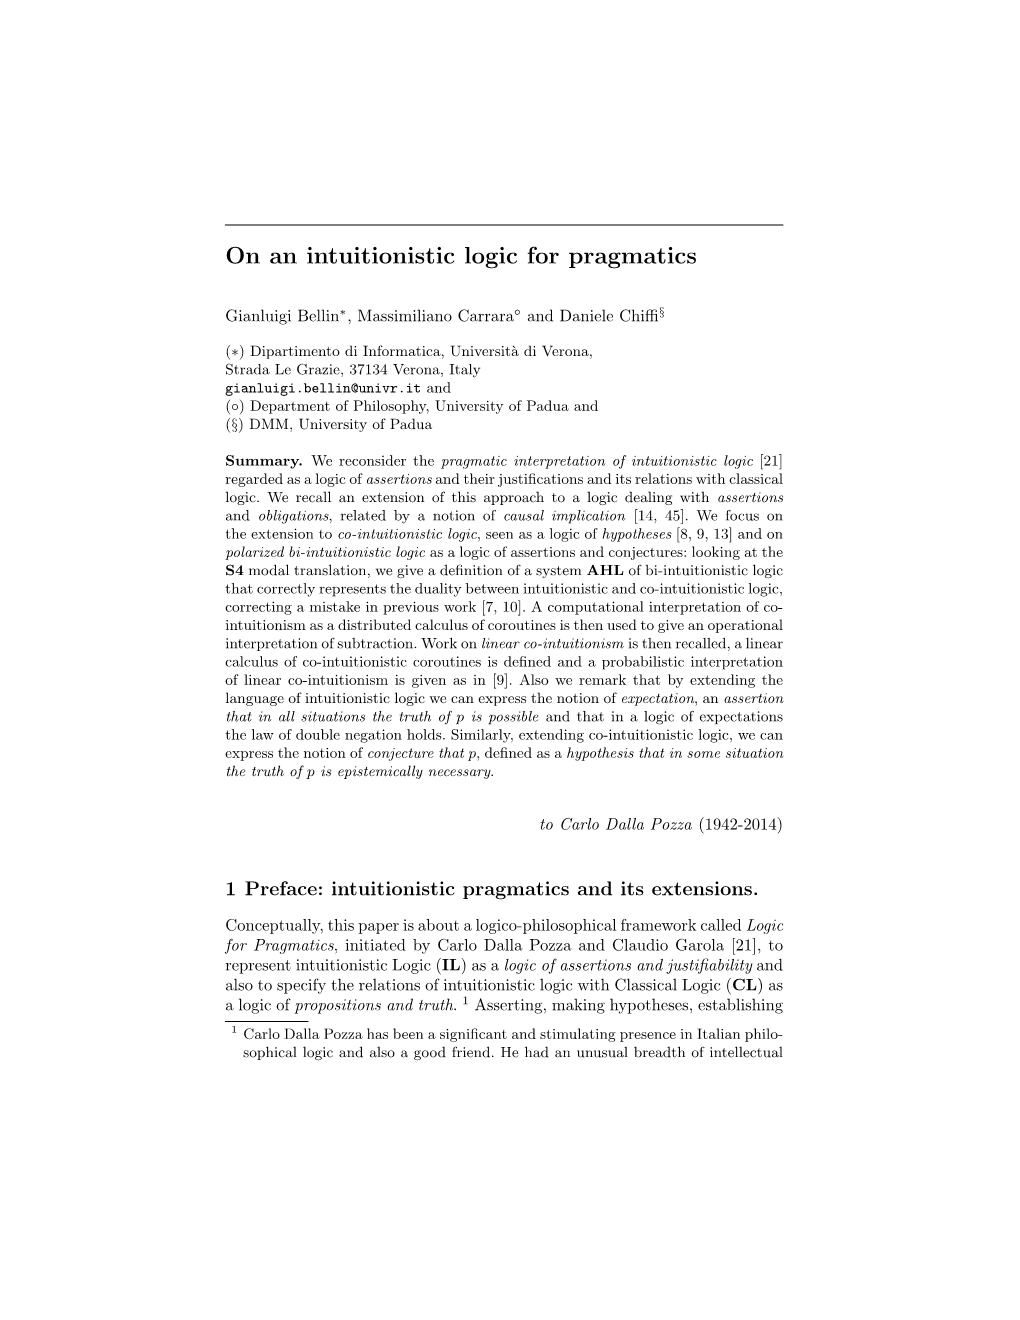 On an Intuitionistic Logic for Pragmatics